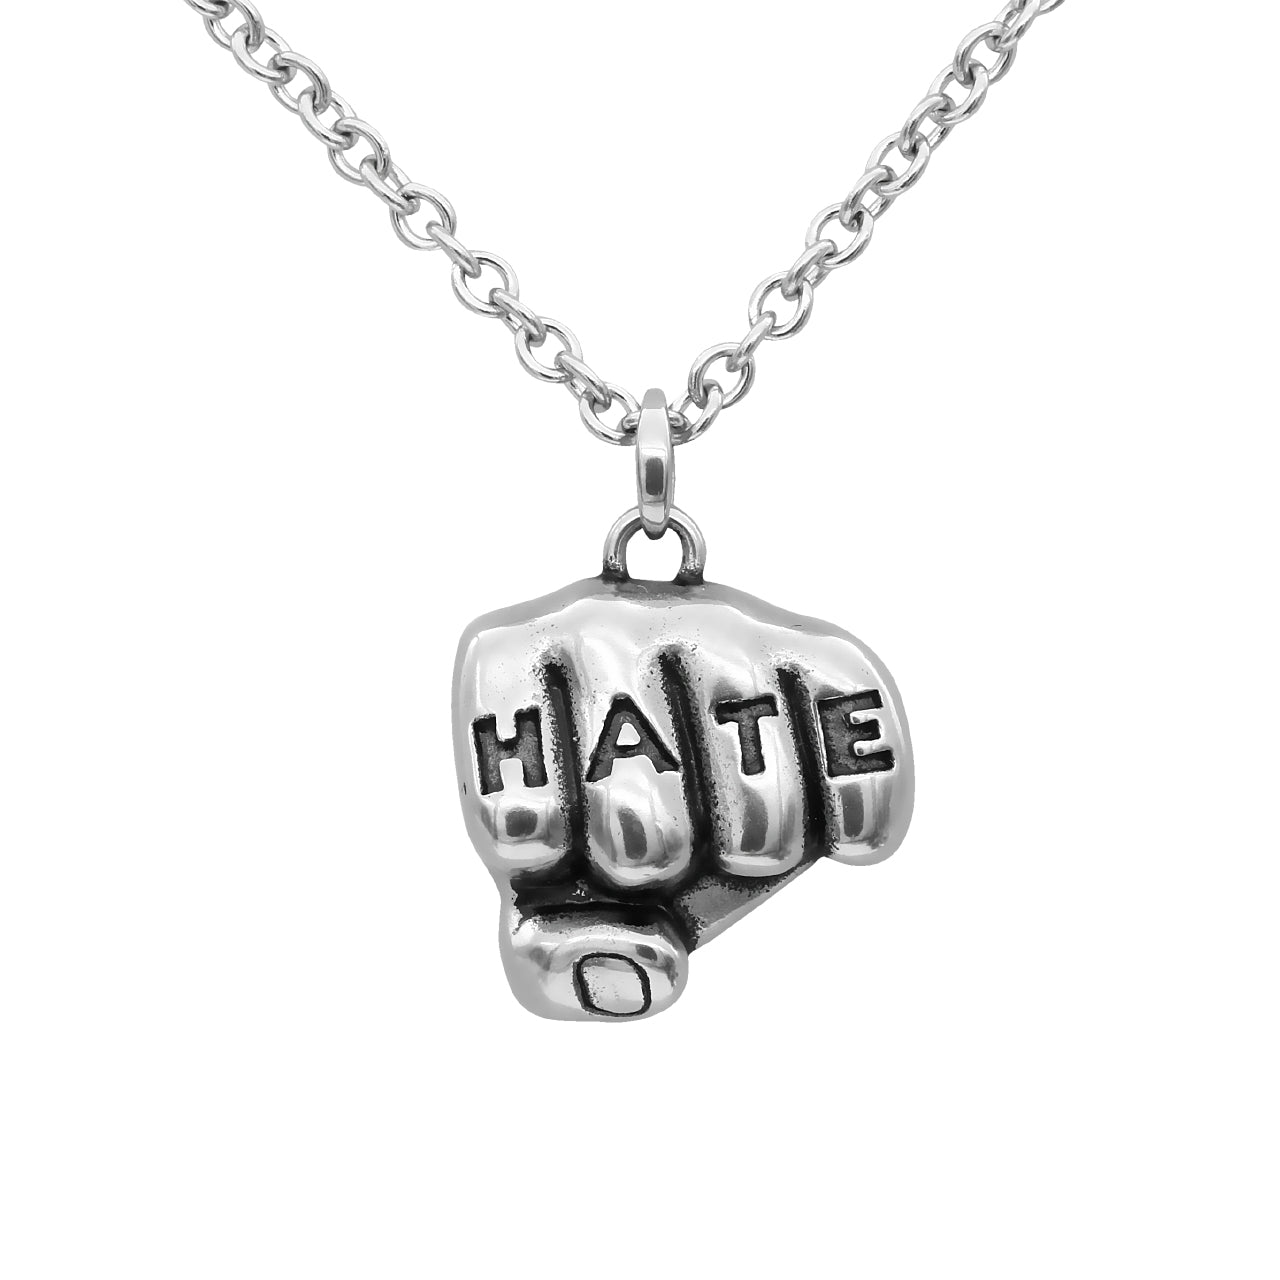 Hate Tattooed Hand Necklace: Stainless Steel Pendant with 'HATE' Knuckle Tattoo - Jewelry & Watches - Bijou Her -  -  - 